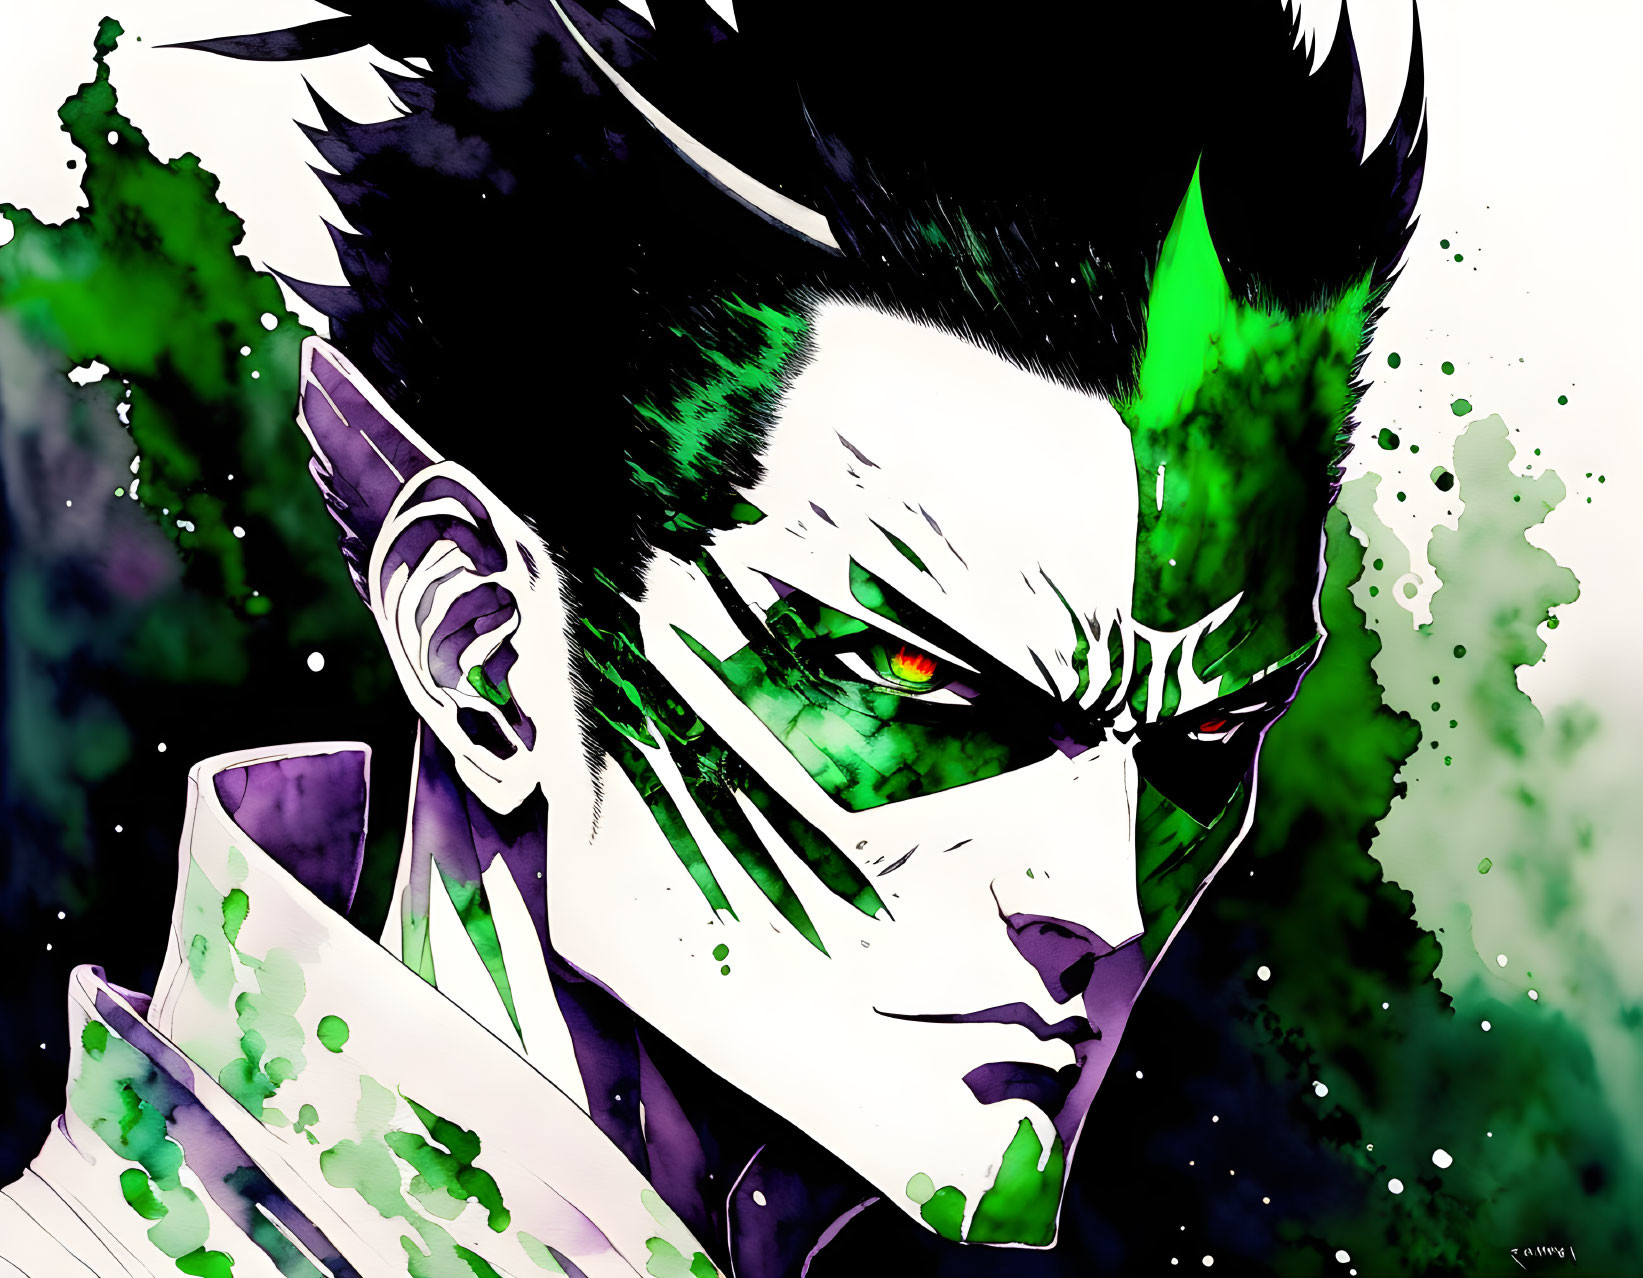 Male anime character with green-tinted hair and intense eyes on splattered green backdrop